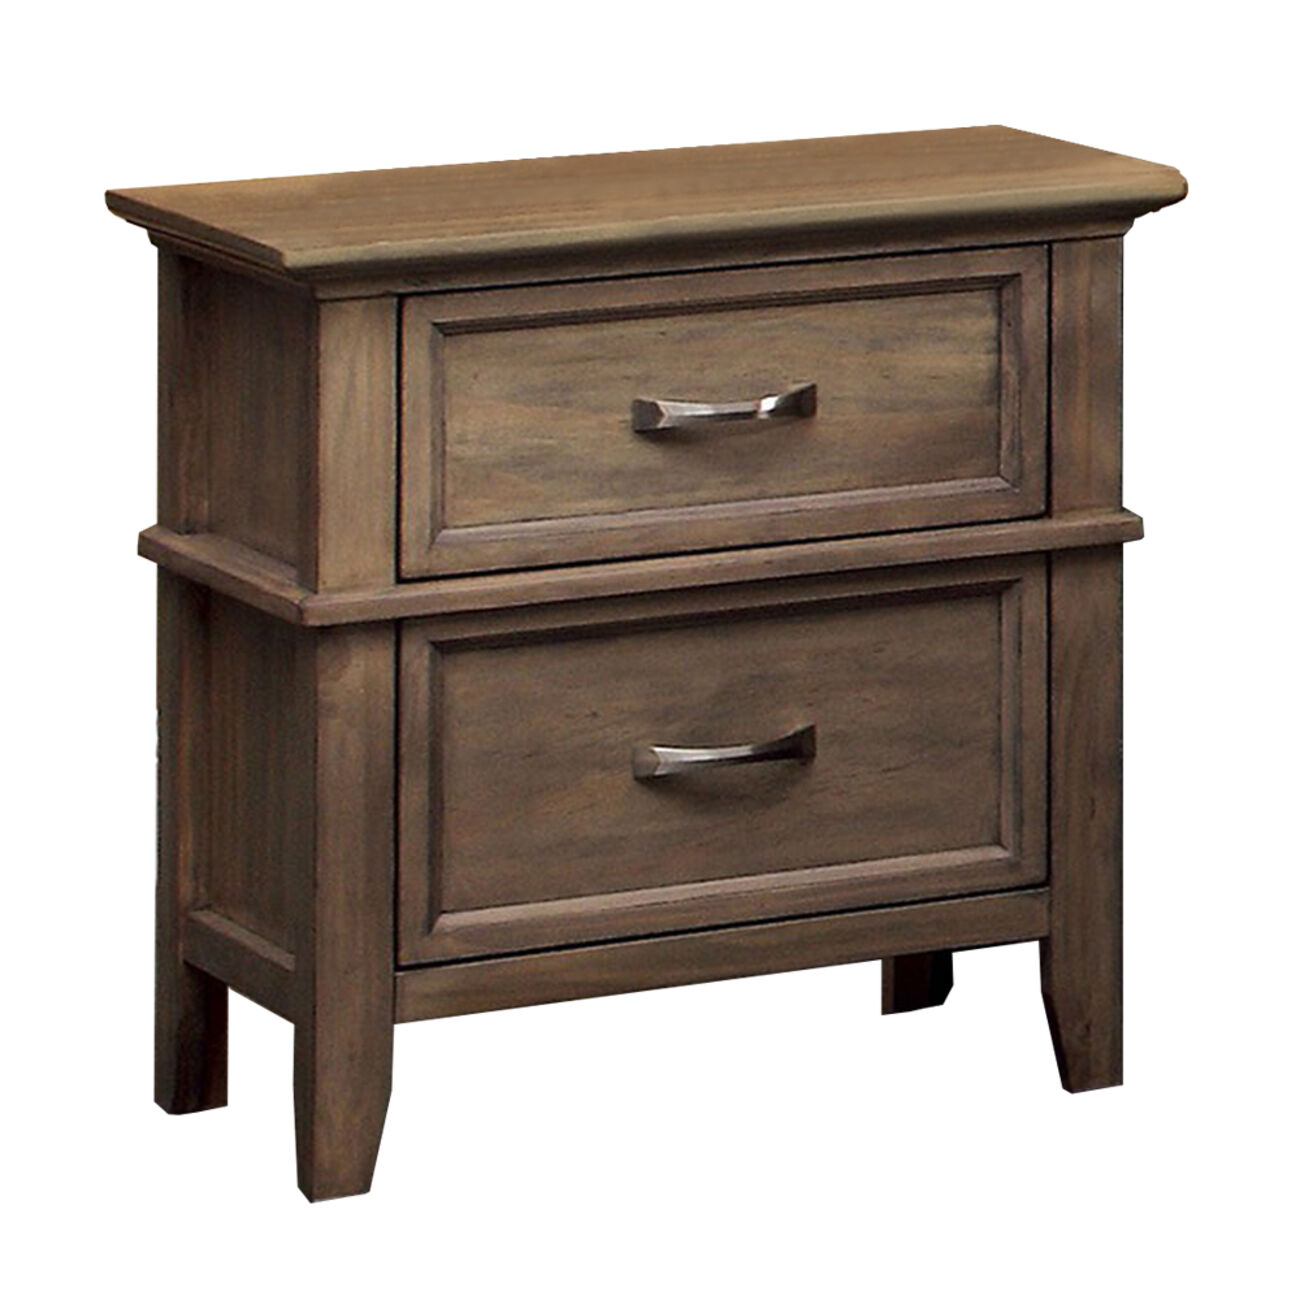 Loxley Transitional Nightstand, Weathered Oak Finish